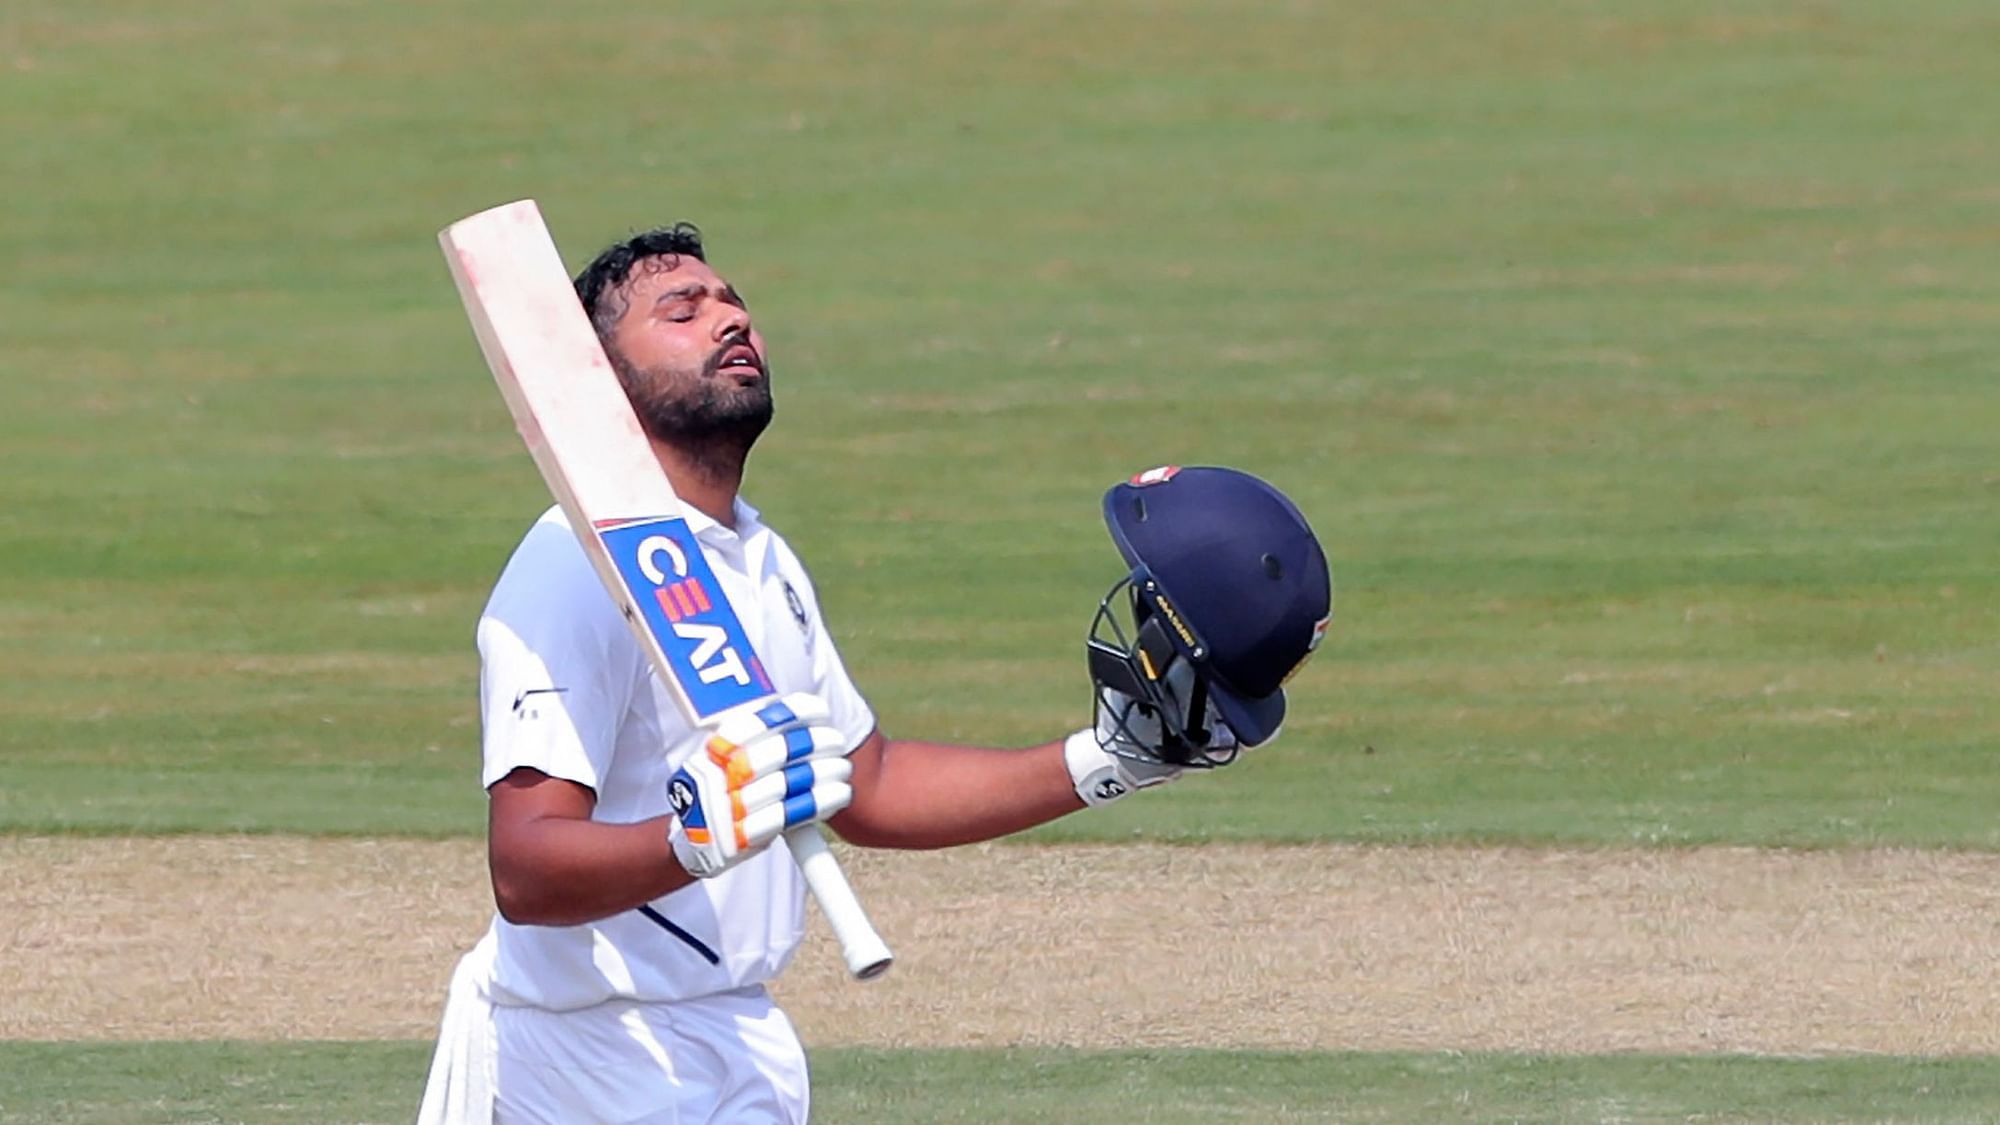 Rohit Sharma equalled  Rahul Dravid’s record of most number of consecutive fifty-plus scores in Tests at home.